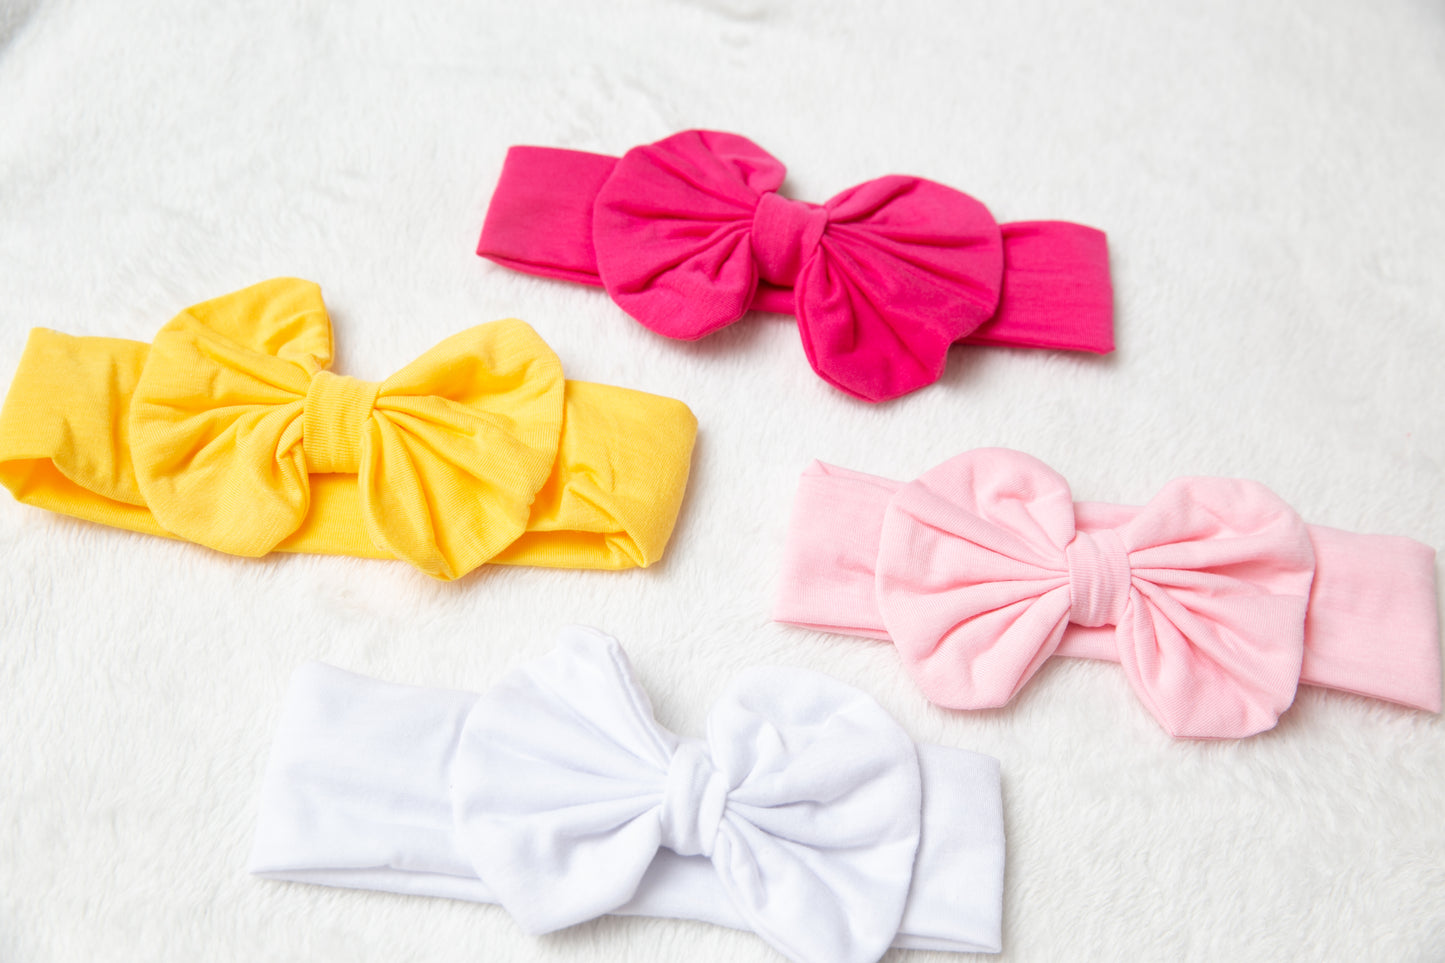 7 colors - Soft Baby Ribbed Headband, Top Knot Bow Girls newborn infant baby toddler soft Headband, red hot pink yellow baby headband bows